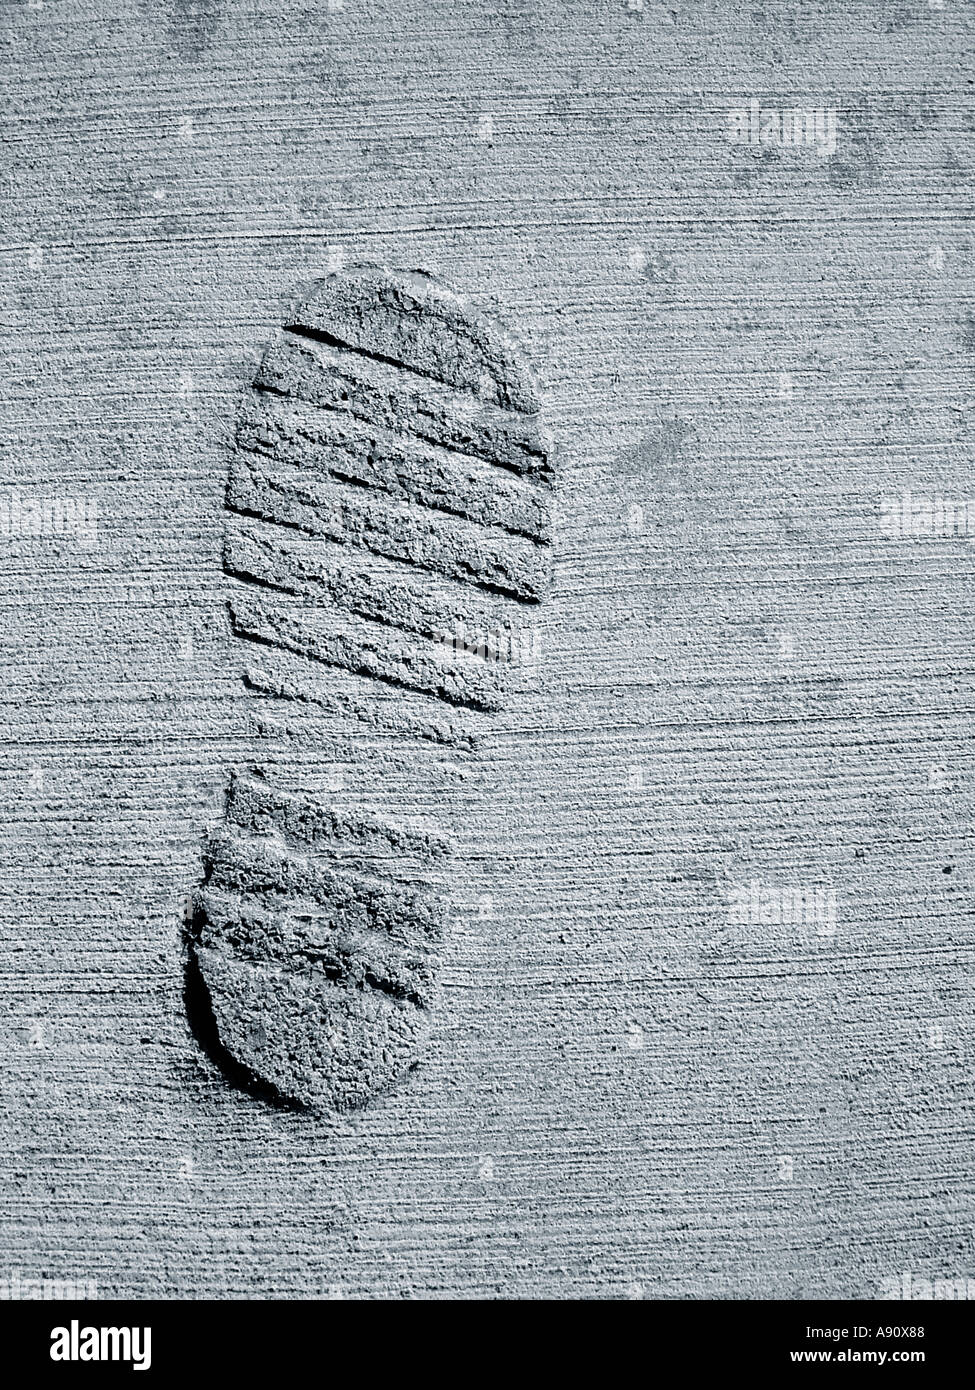 Urban Scene of Boot Print in Cement Viewed From Above Copy Space Stock Photo